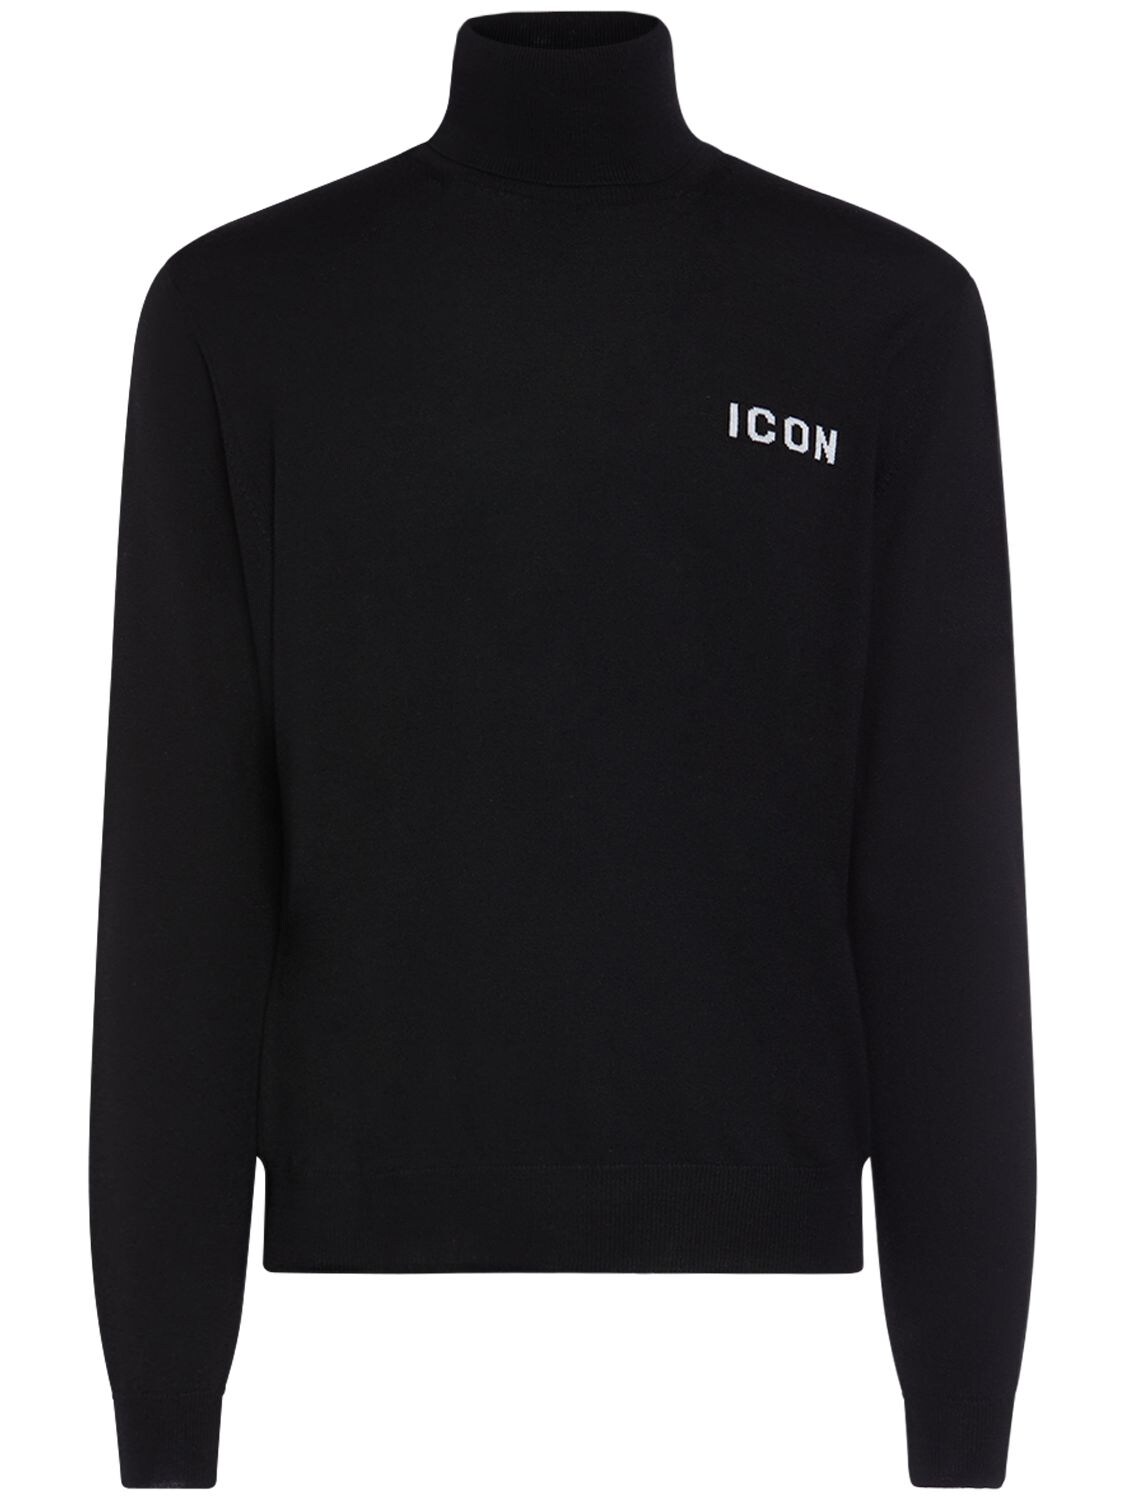 DSQUARED2 ICON WOOL KNIT TURTLENECK SWEATER